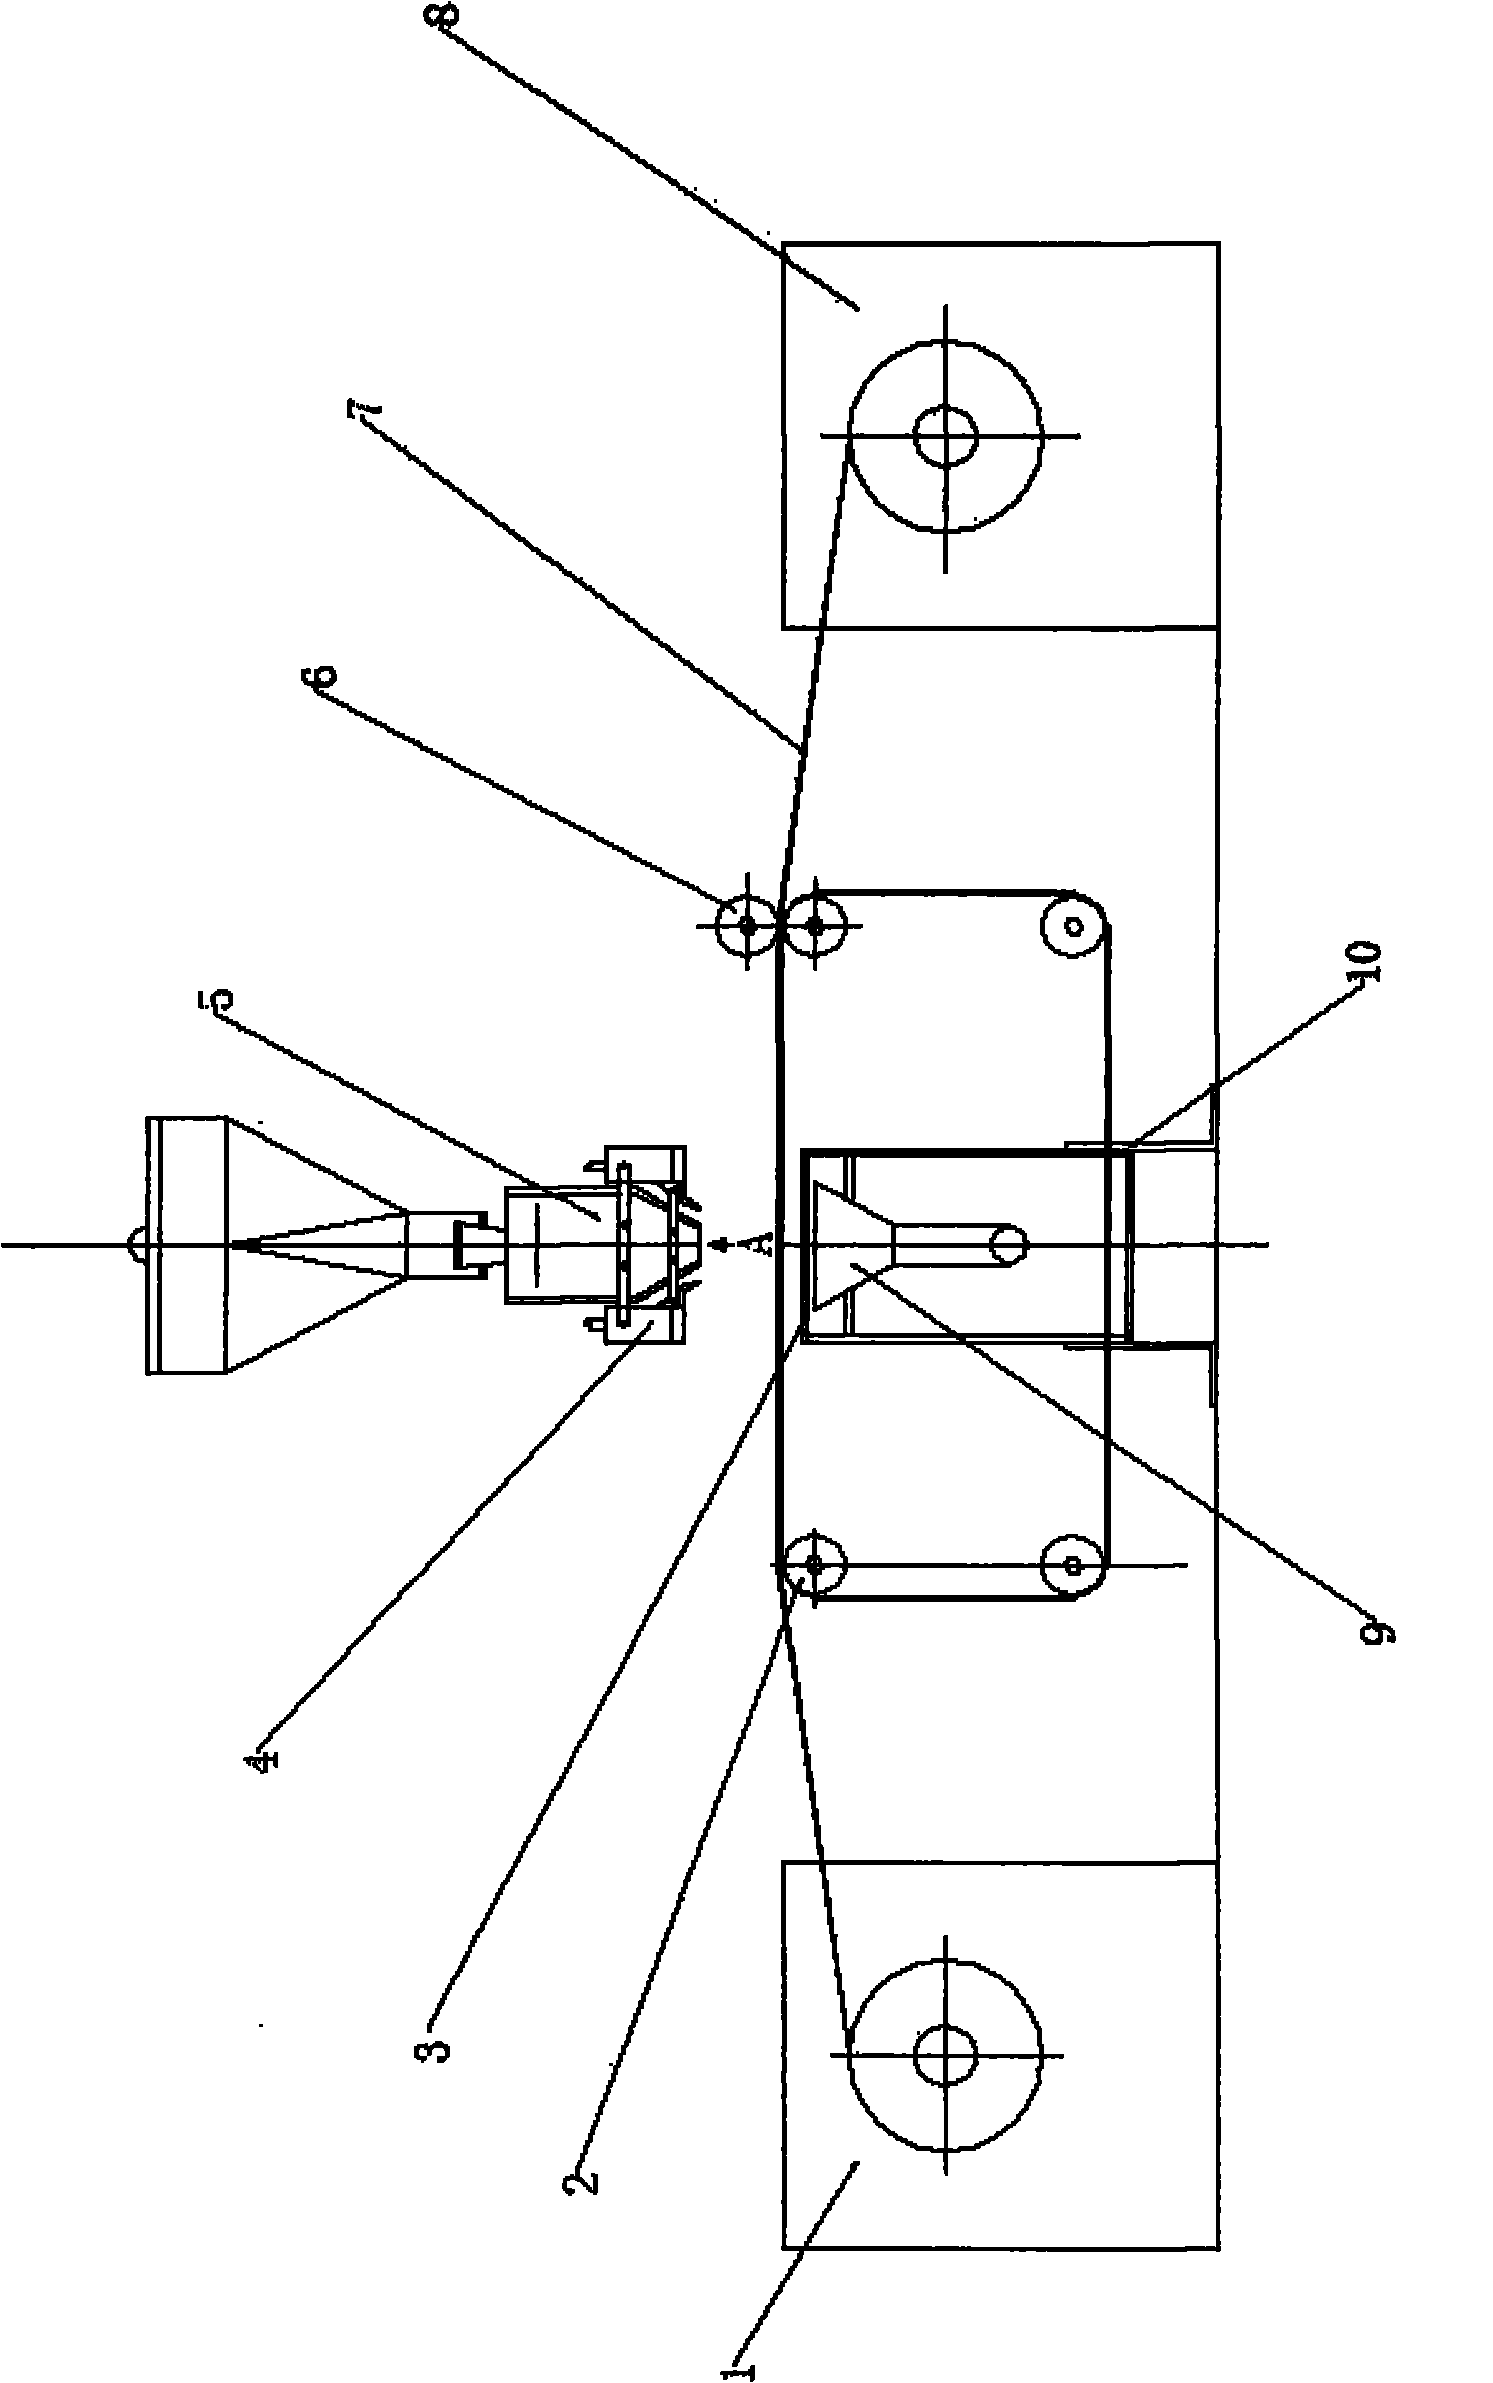 Device for preparing non-woven fabric product continuously with electrostatic spinning method